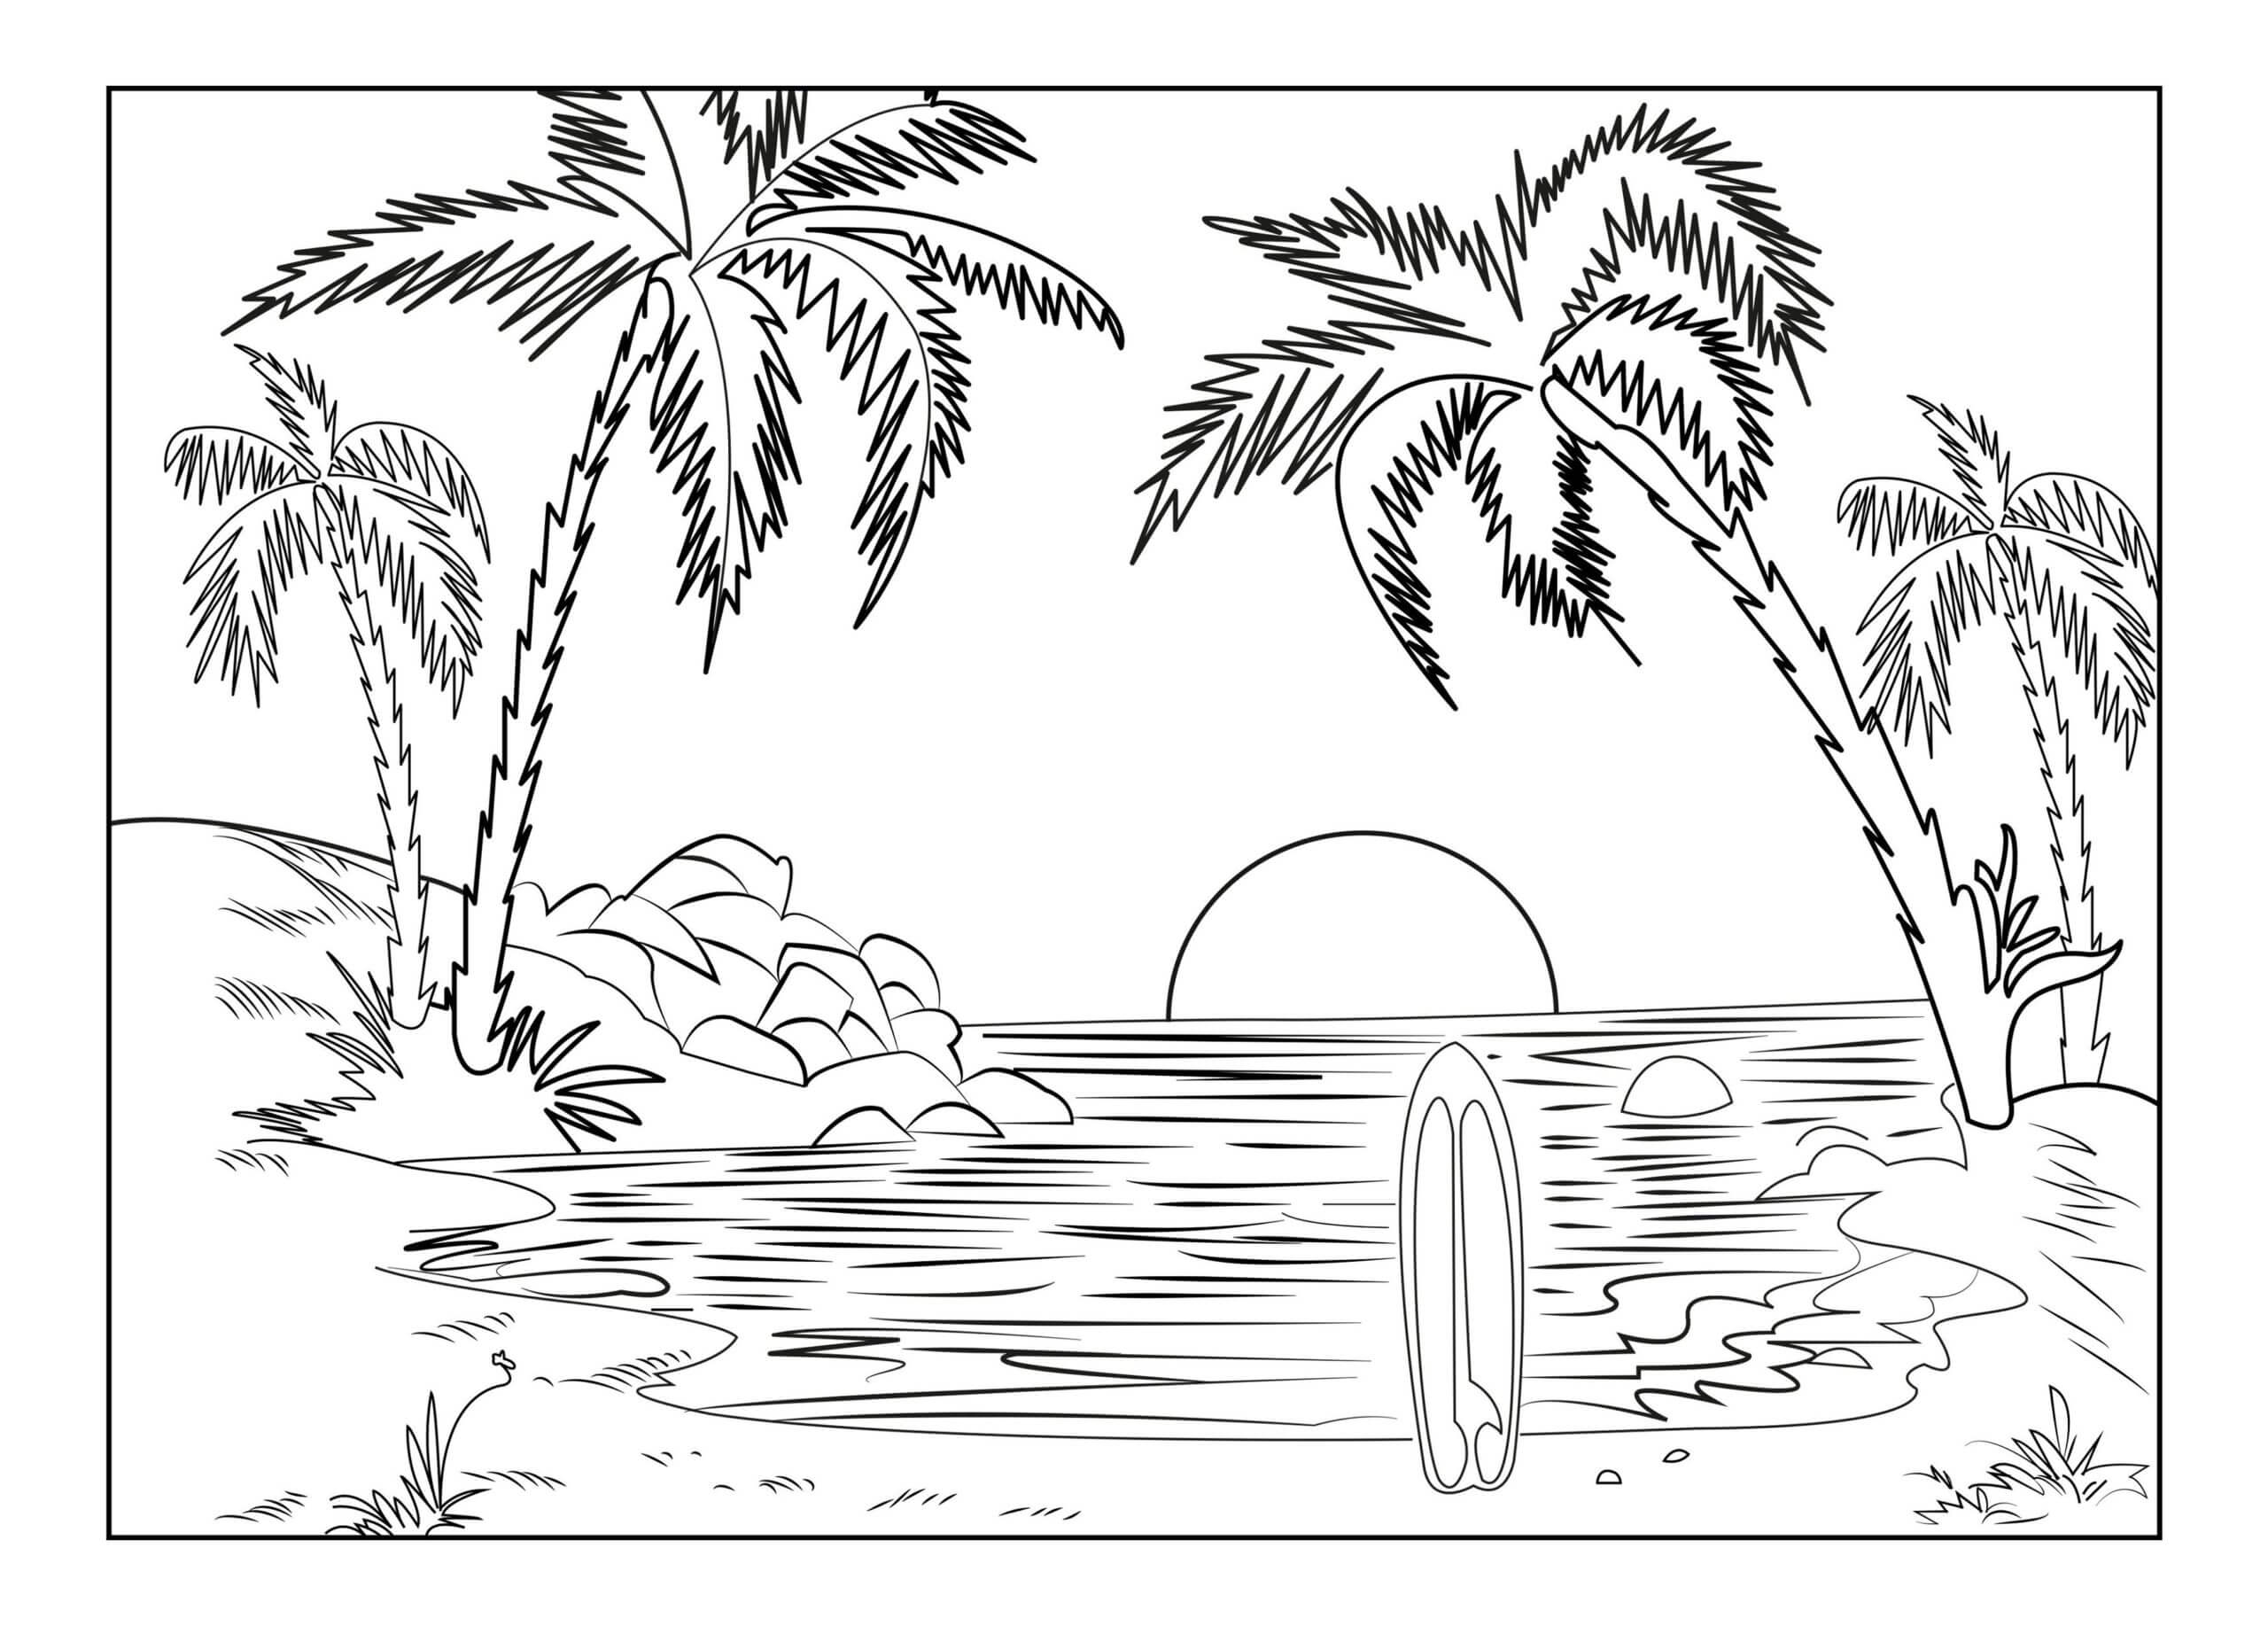 Sunset Coloring Pages   Free Printable Coloring Pages for Kids